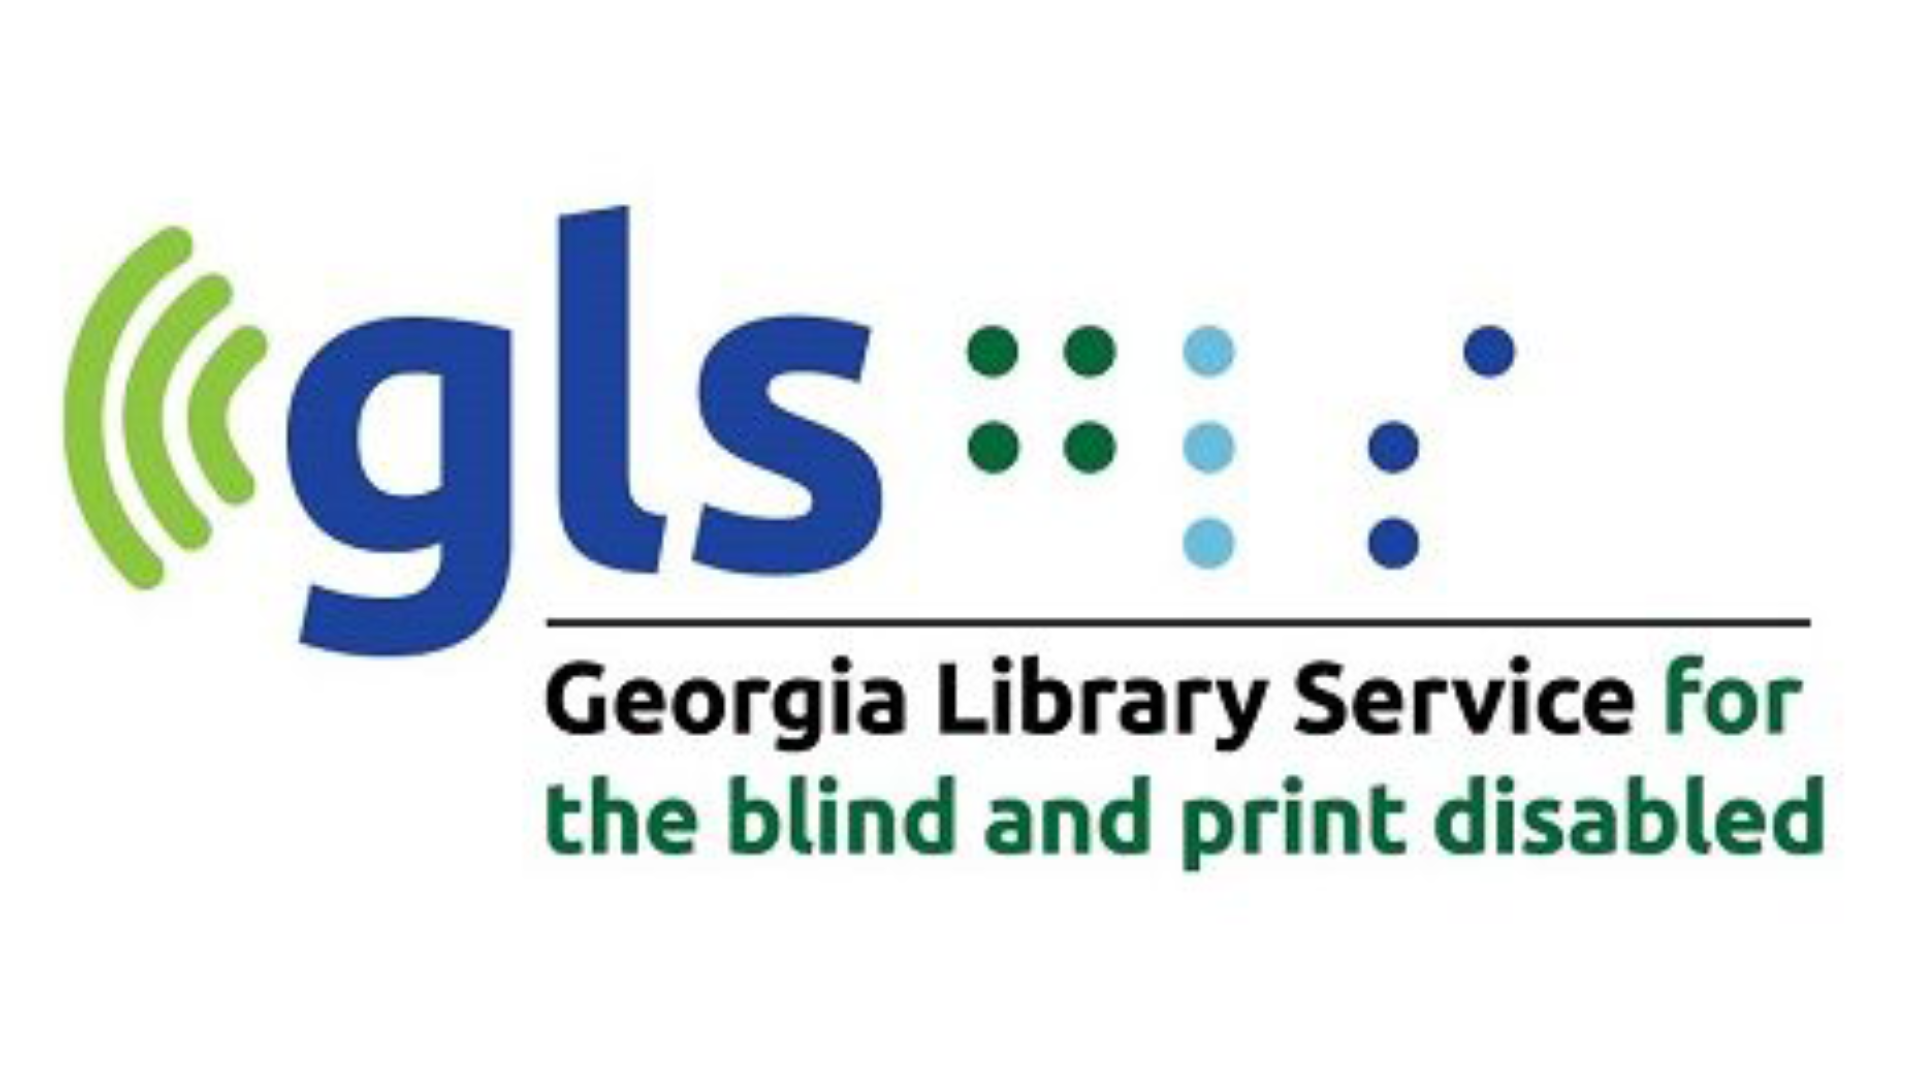 Image featuring the Georgia Library Services for the Blind logo.